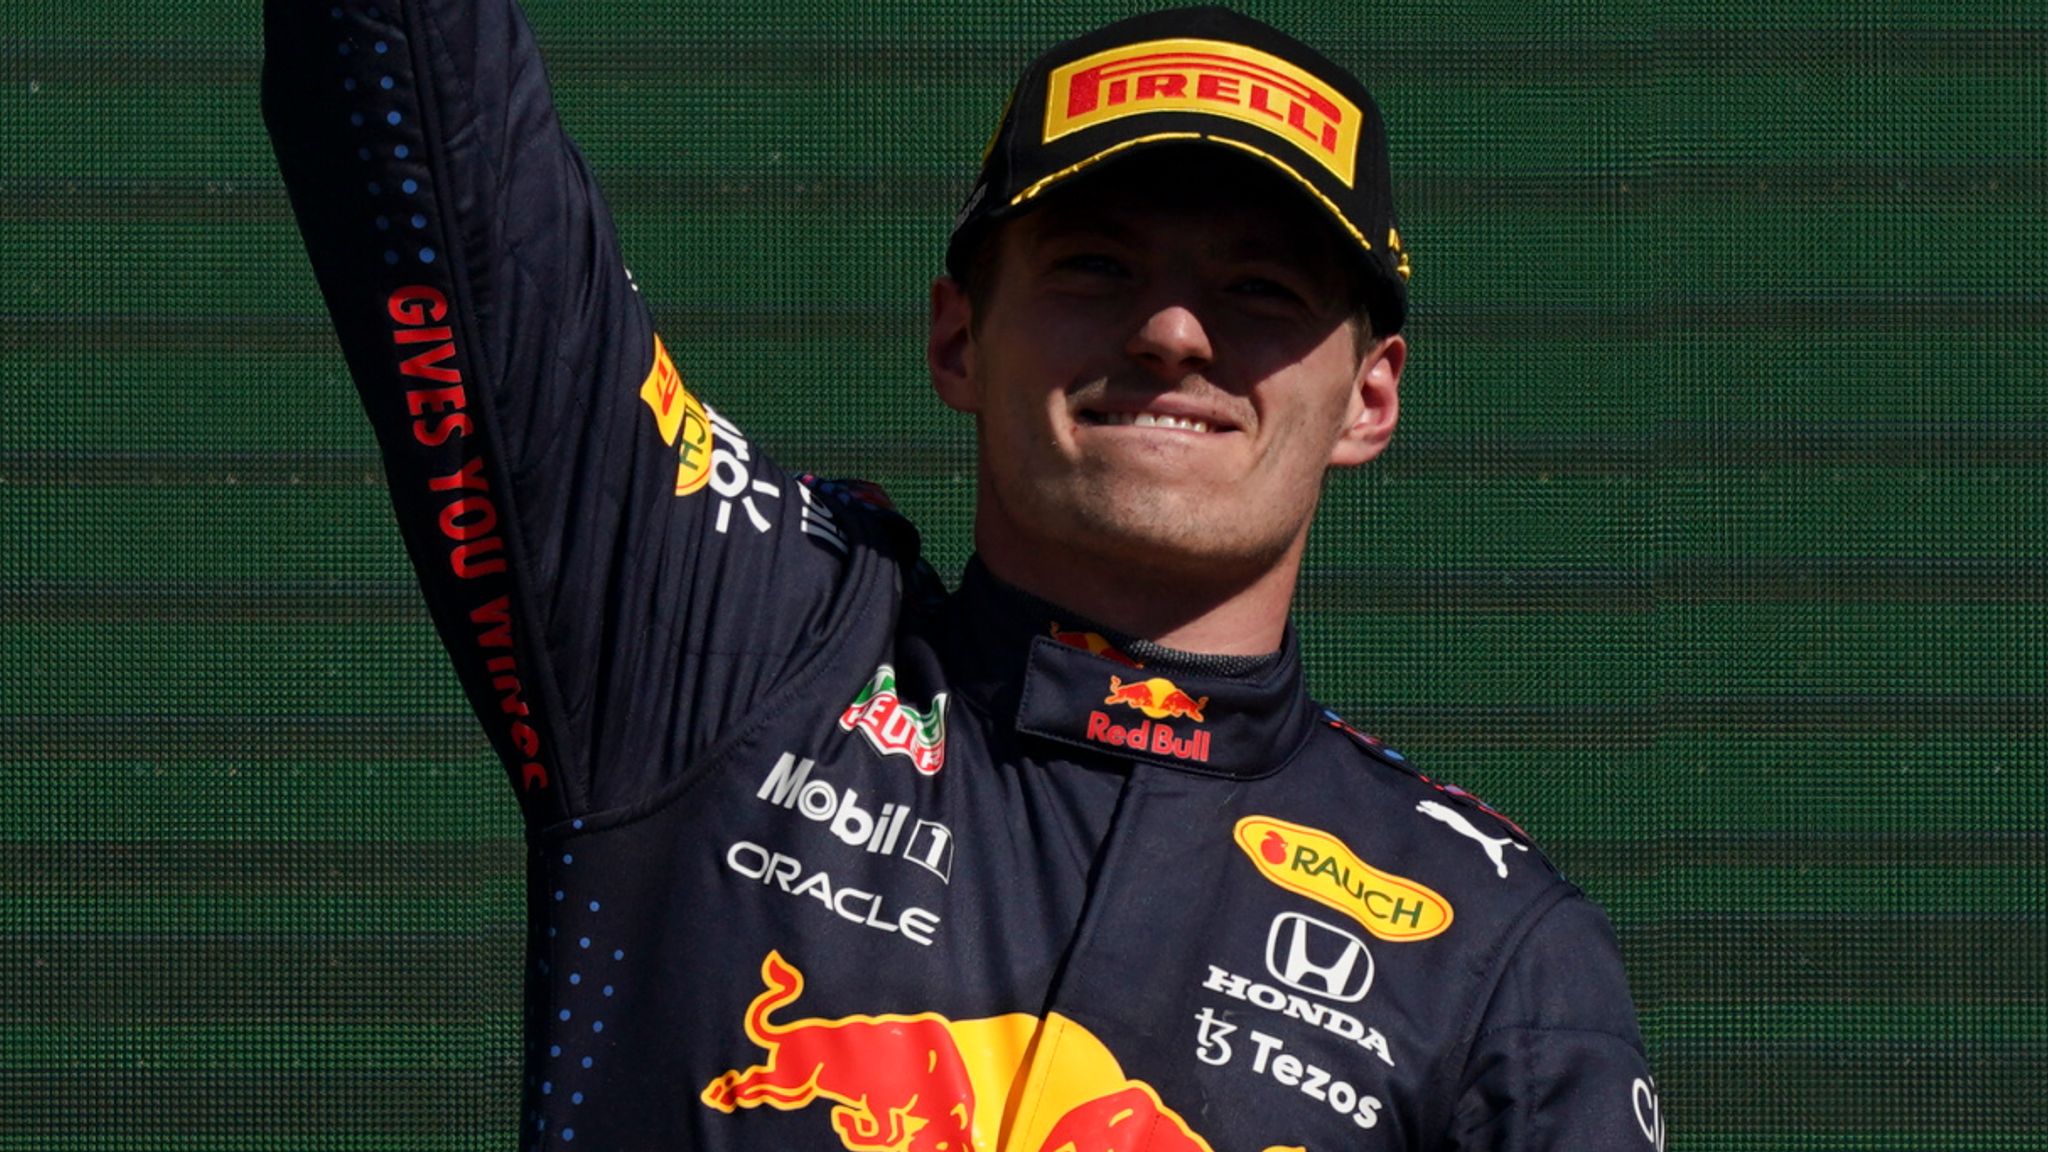 Mexico City Gp Max Verstappen Takes Runaway Victory Ahead Of Lewis Hamilton To Grow F1 Title Lead F1 News